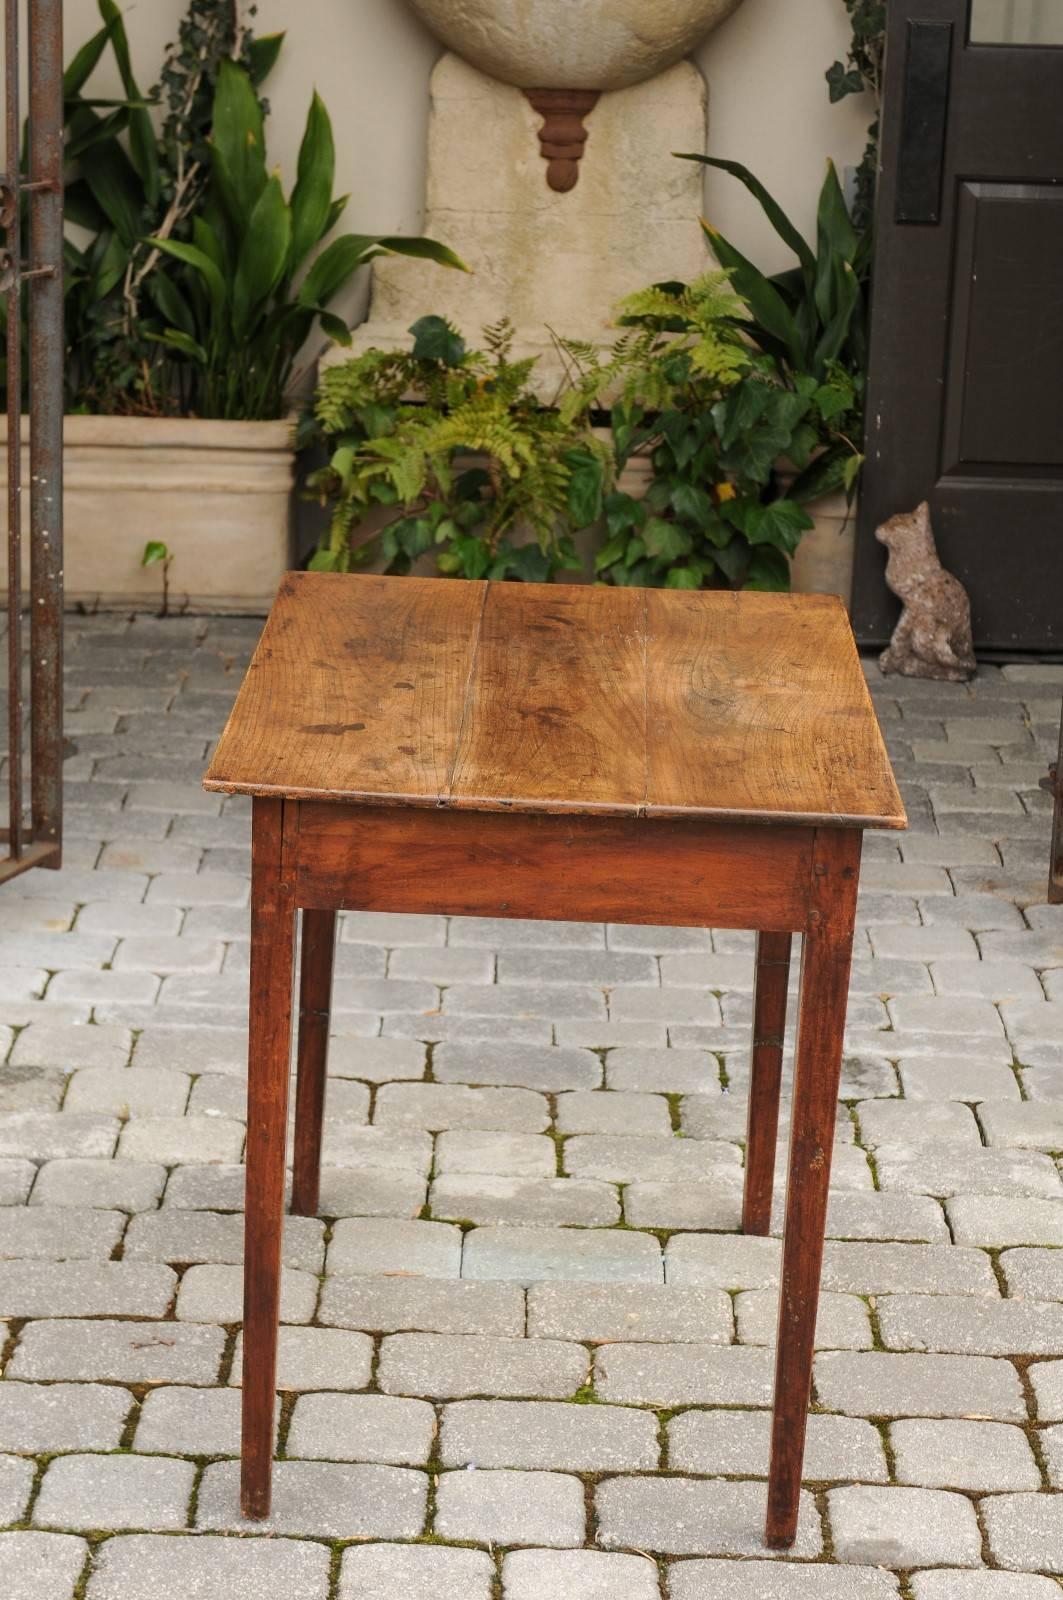 Wood Rustic French Elm Side Table with Single Drawer and Tapered Legs, circa 1870